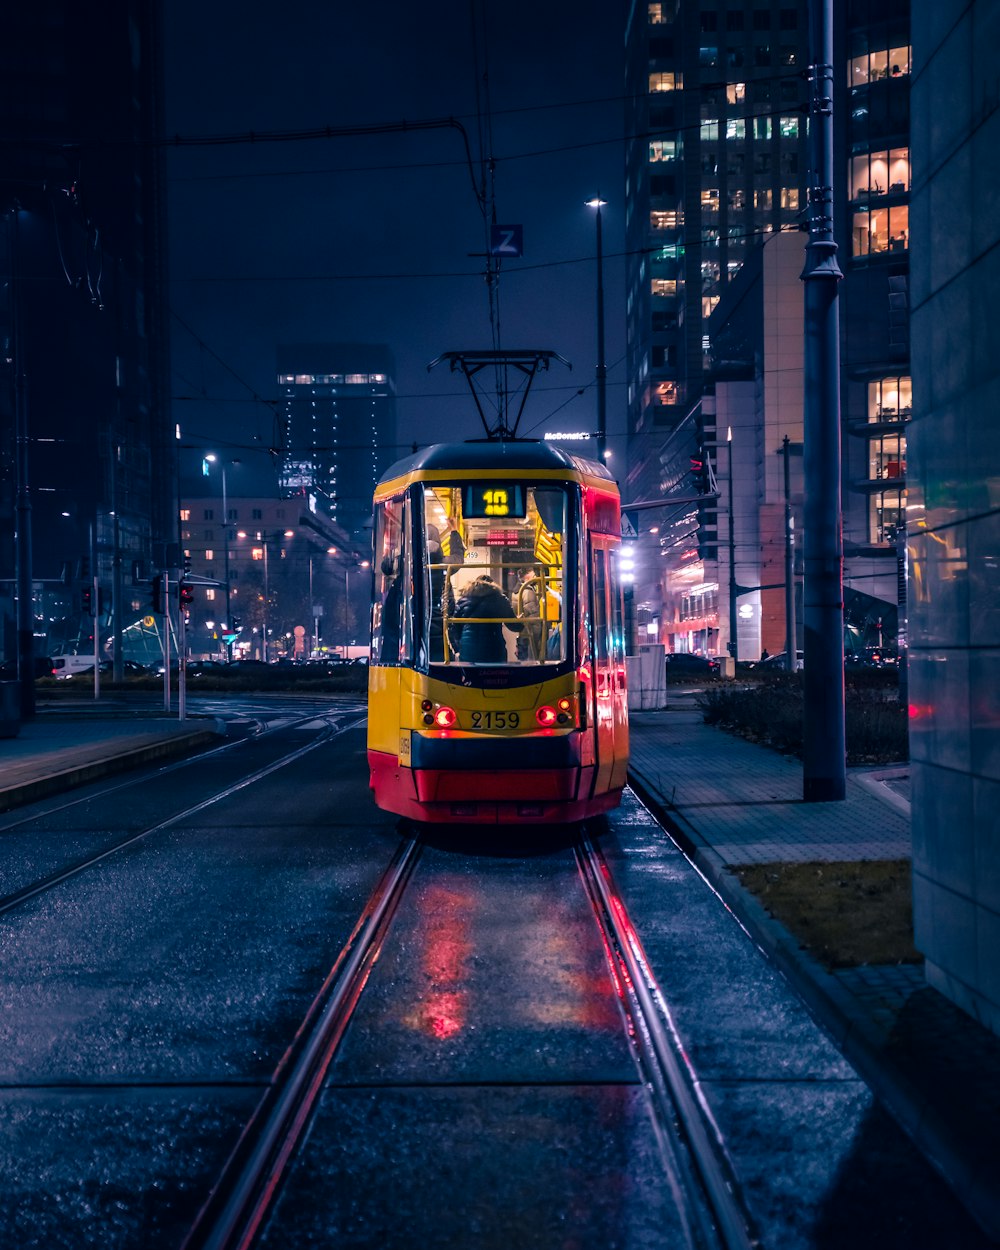 a red and yellow trolley on a city street at night